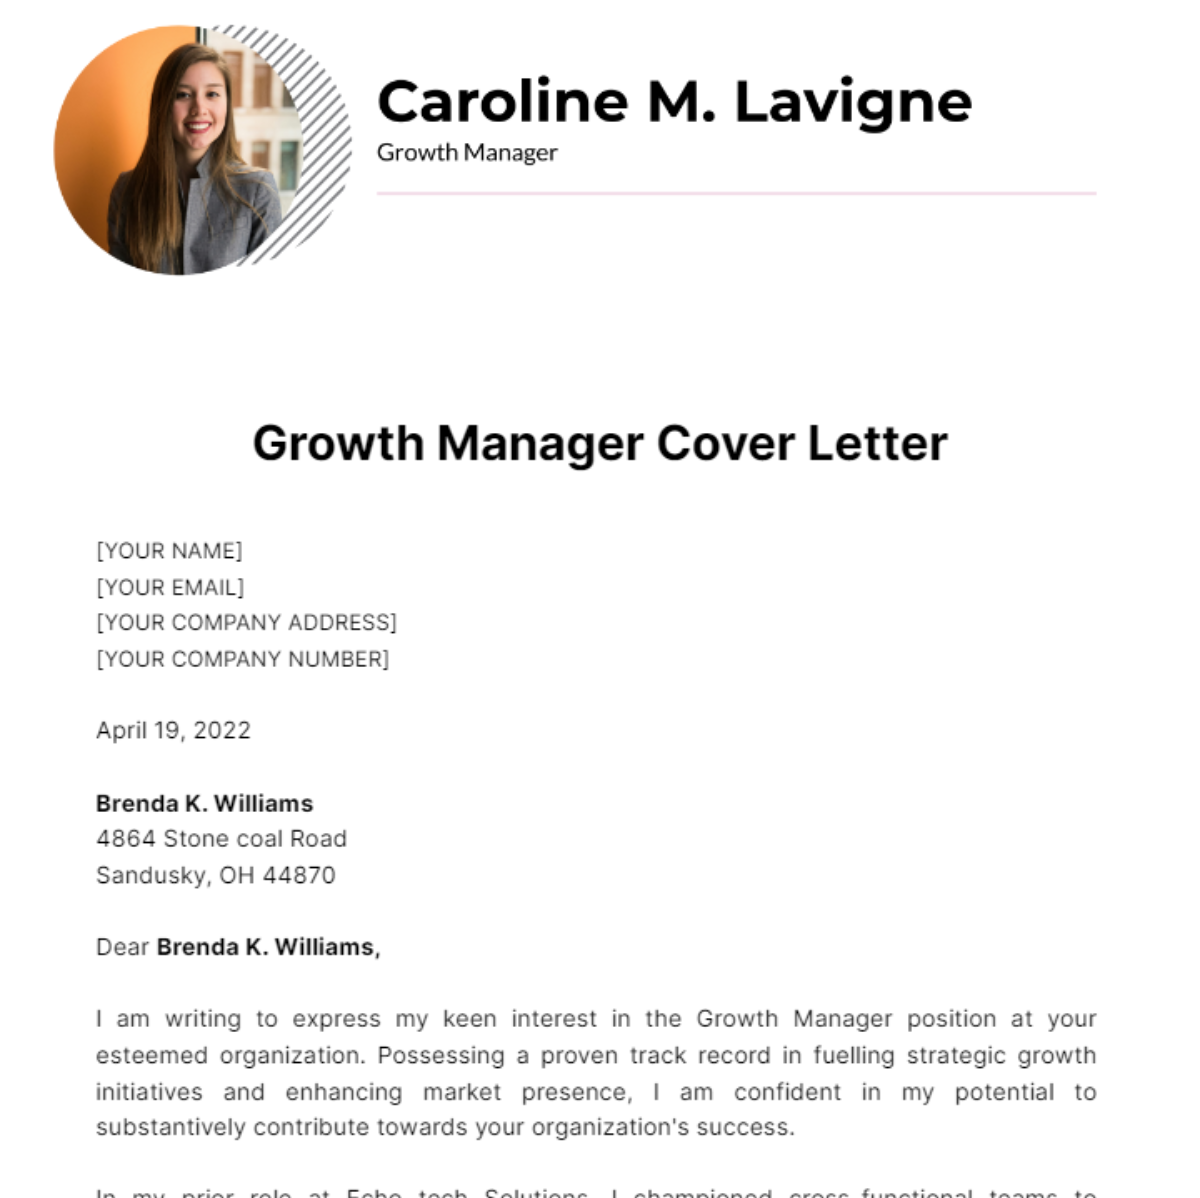 Growth Manager Cover Letter Template